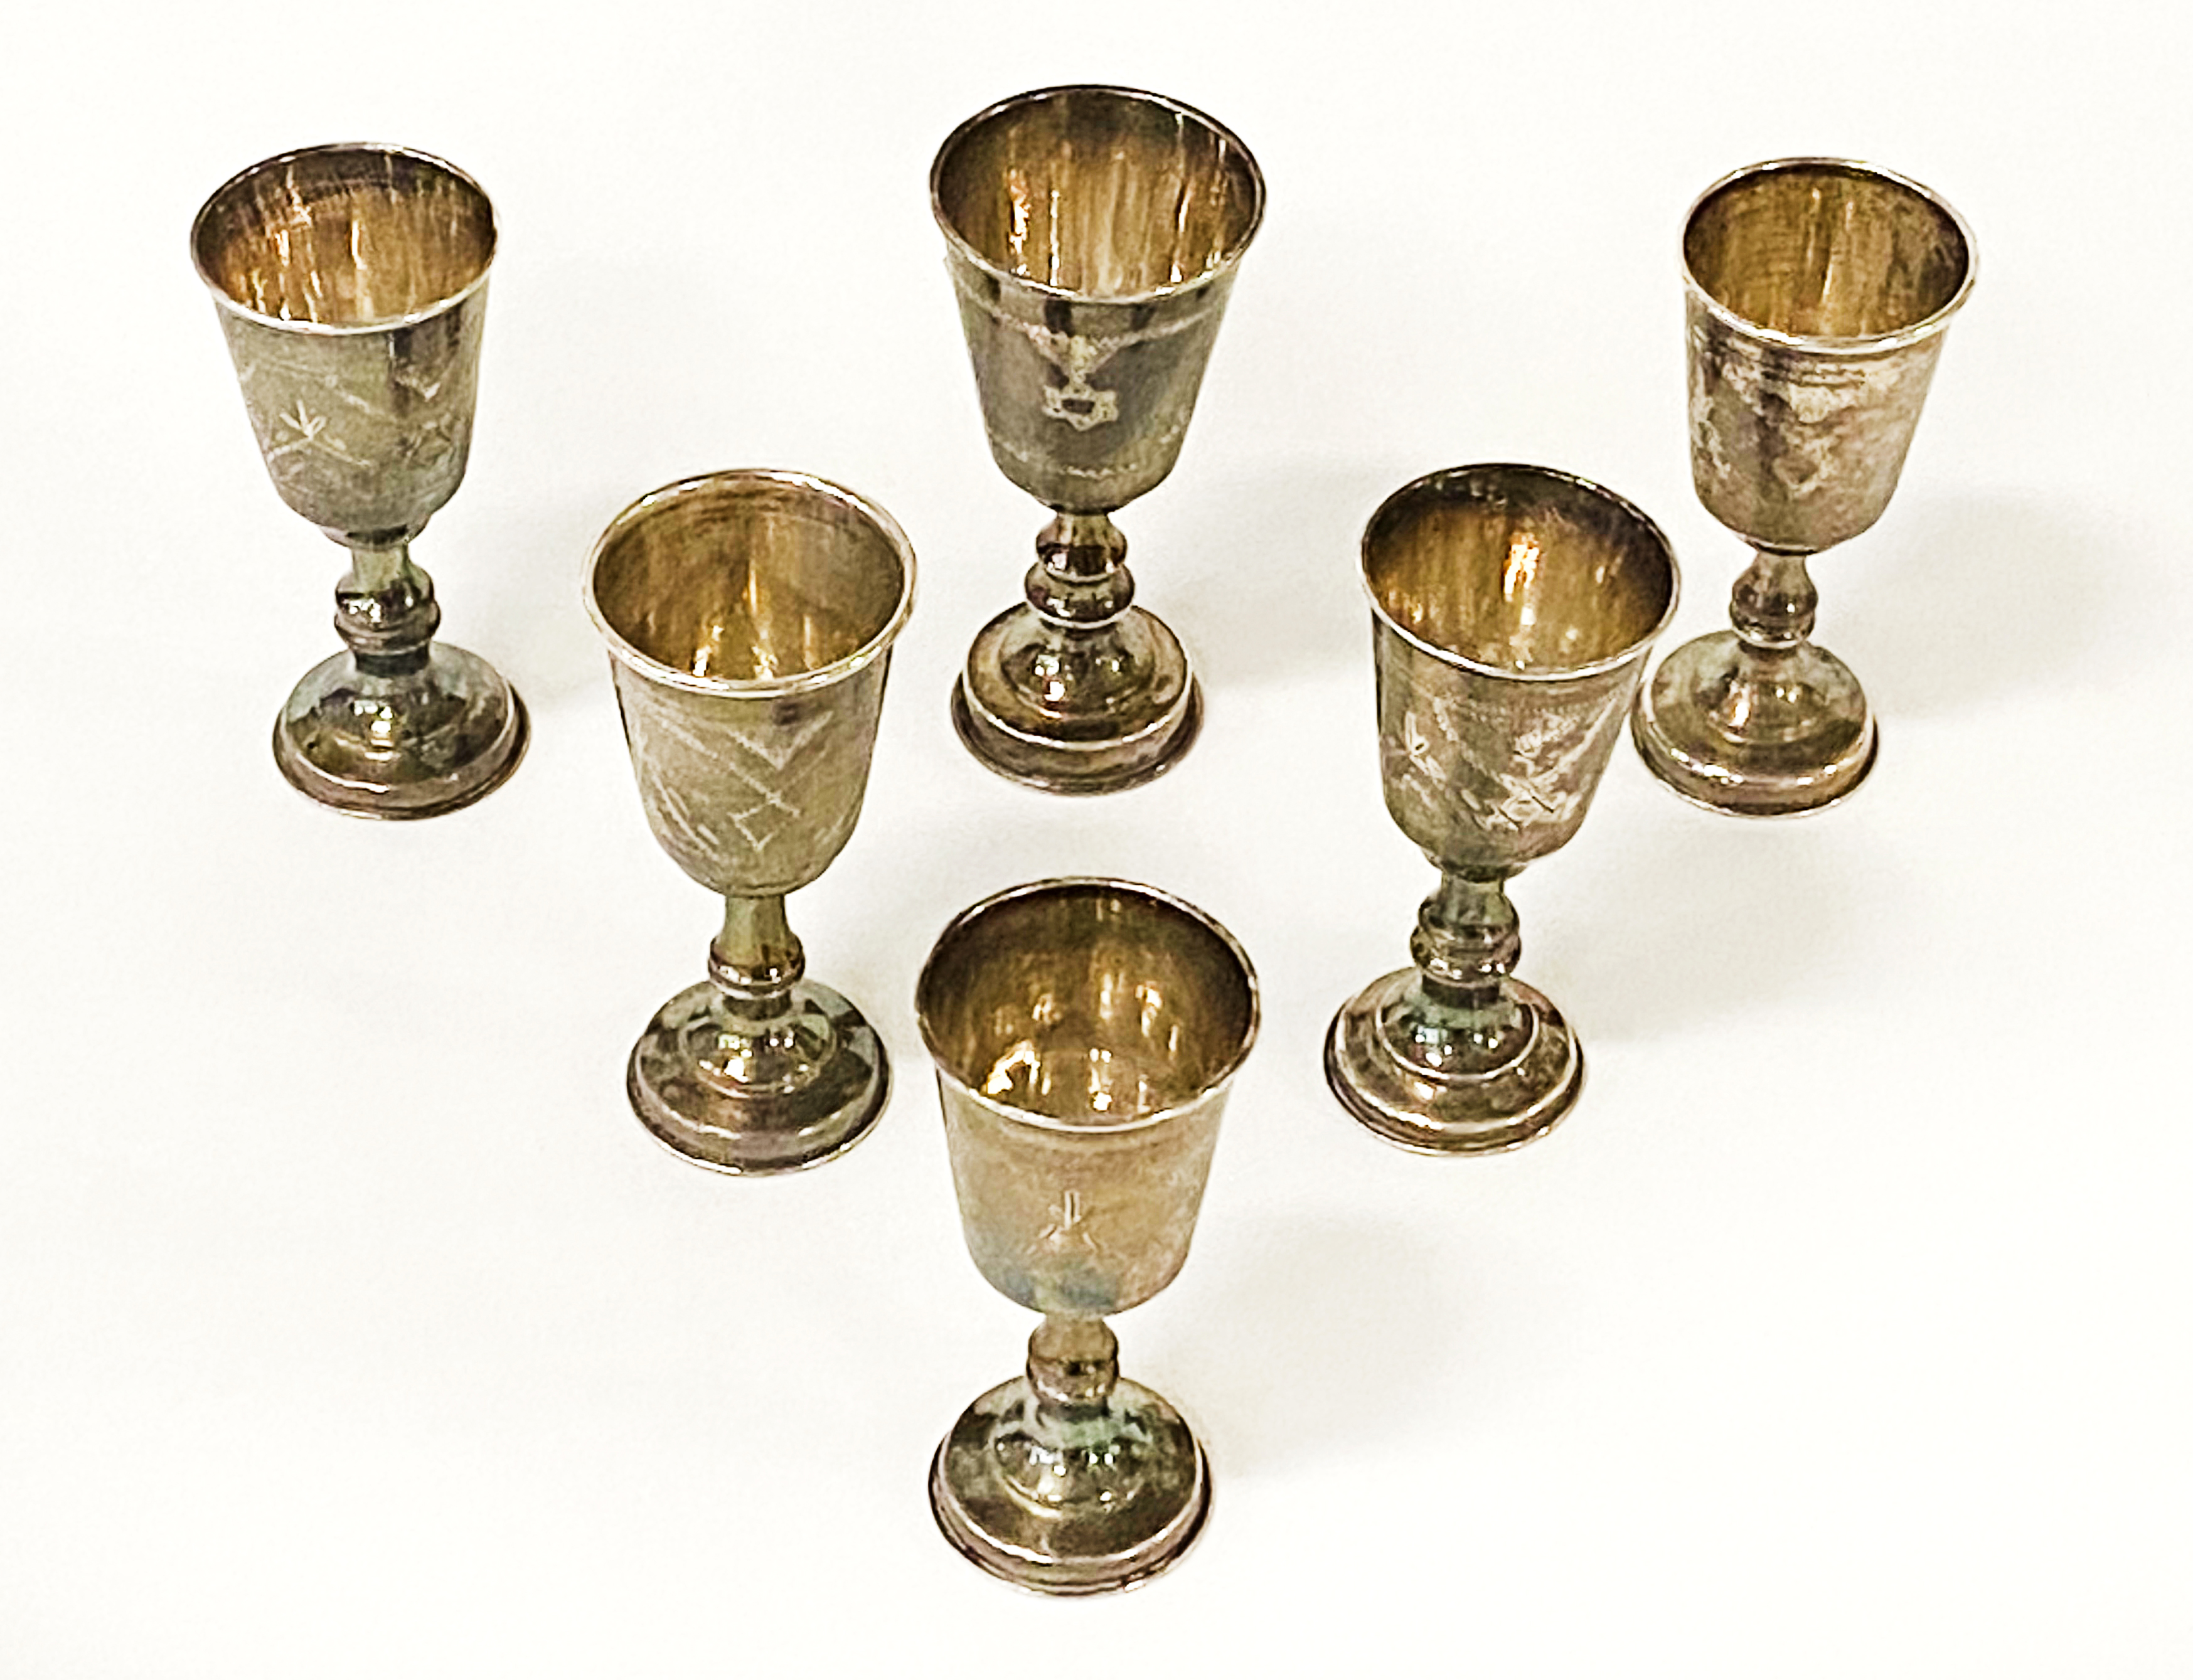 SIX KIDDISH CUPS IN HM SILVER - 129 GRAMS APPROX